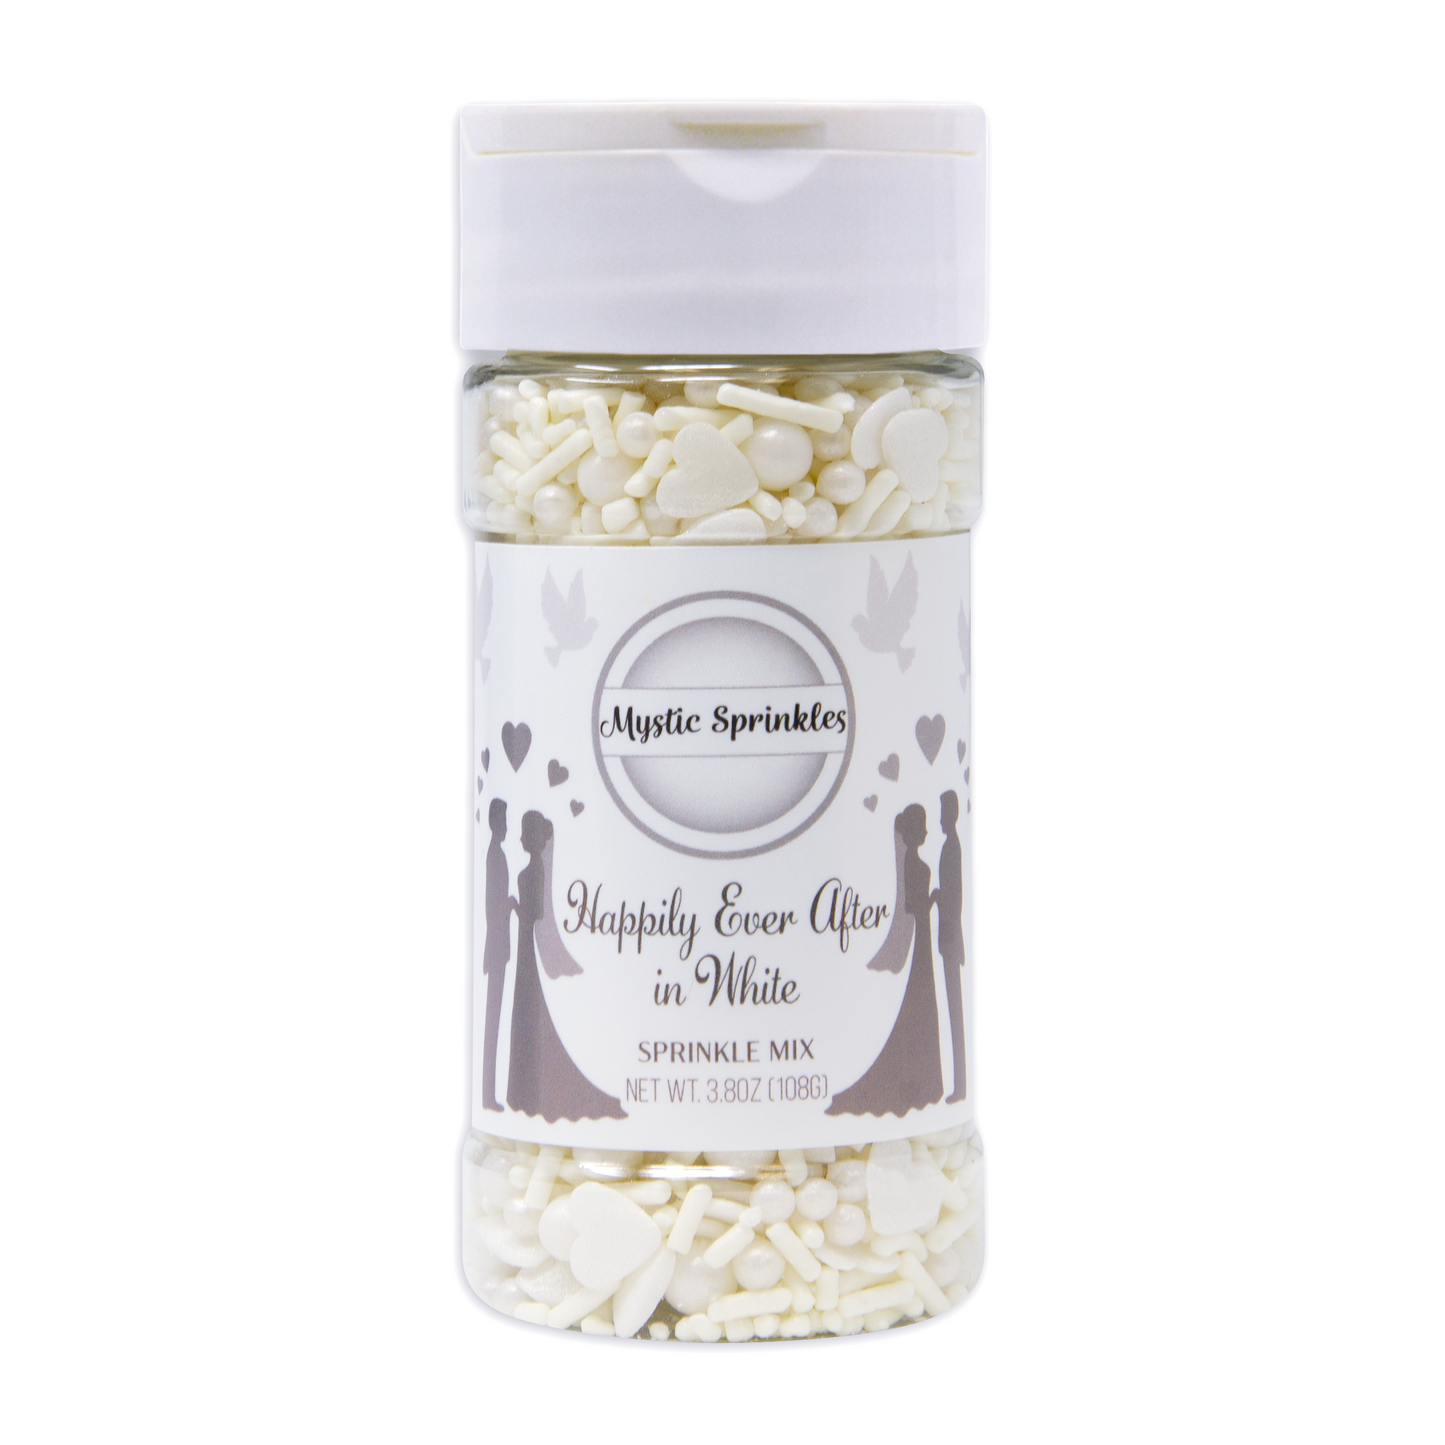 Happily Ever After in White Sprinkle Mix 3.8oz